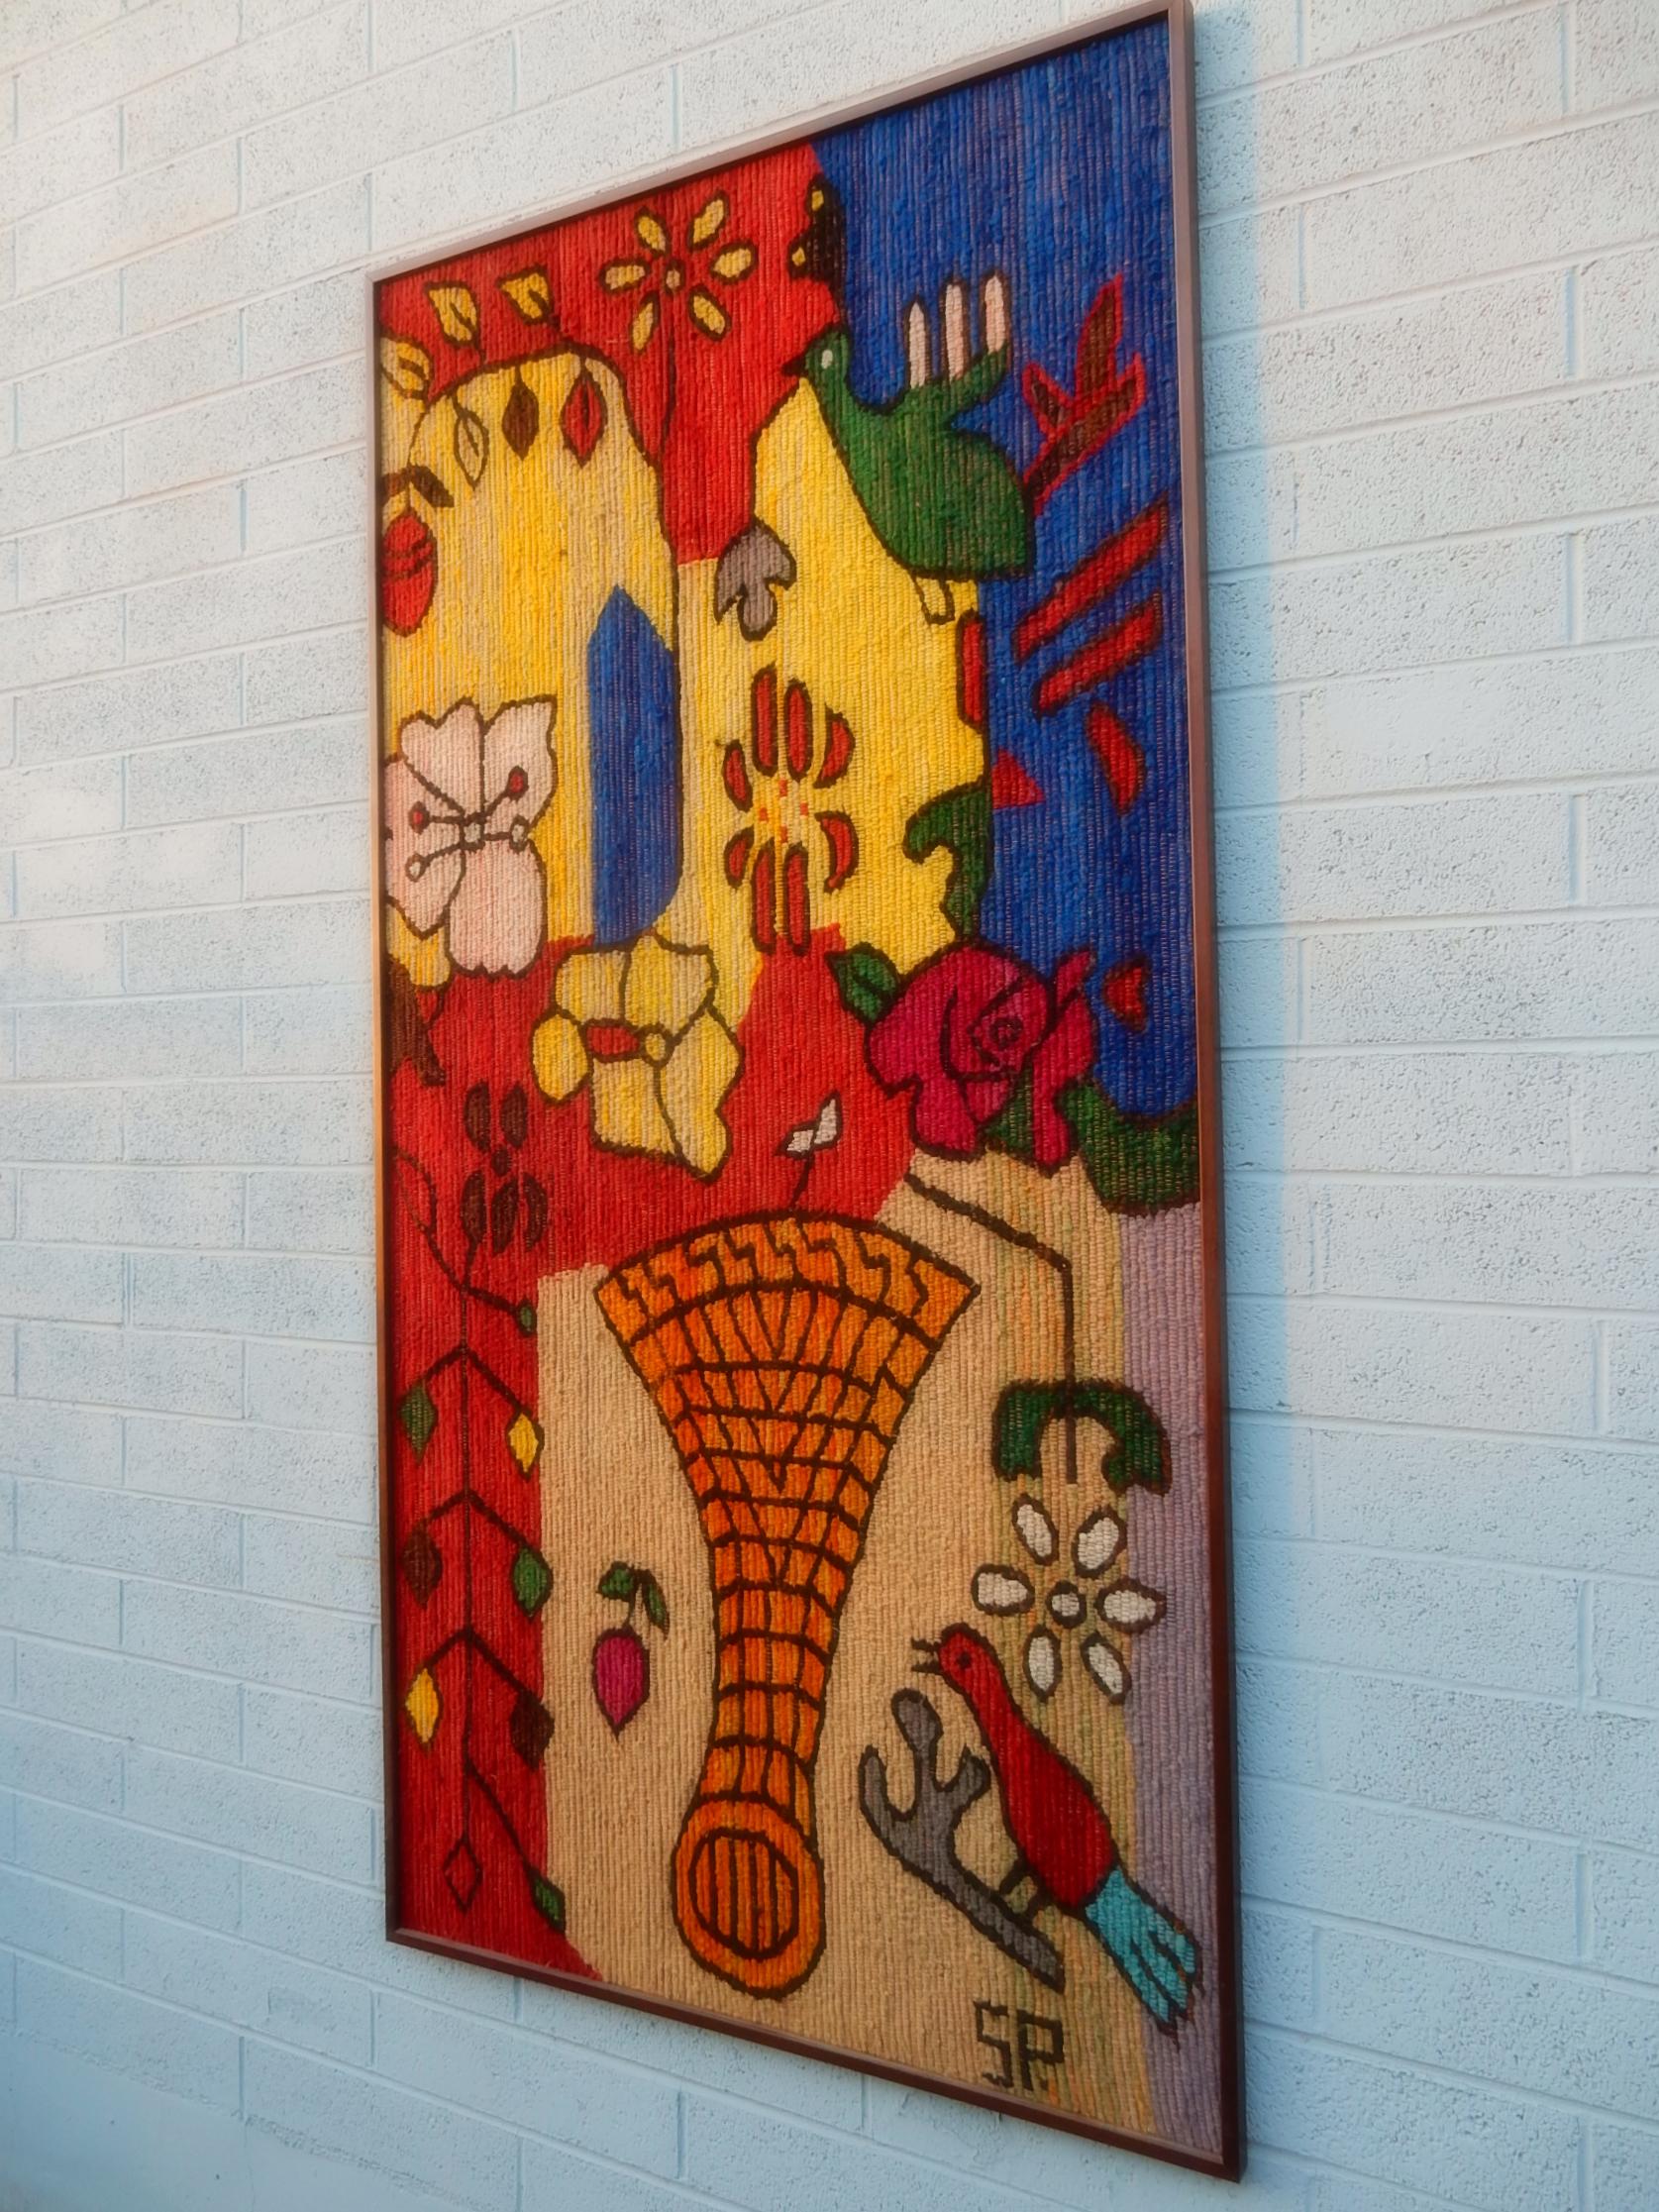 Magnificent 6 foot x 3 foot brightly colored wool woven tapestry
professionally framed in birchwood.
Surreal flowers, fruit and birds in gorgeous primary colors.
Signed S.P.